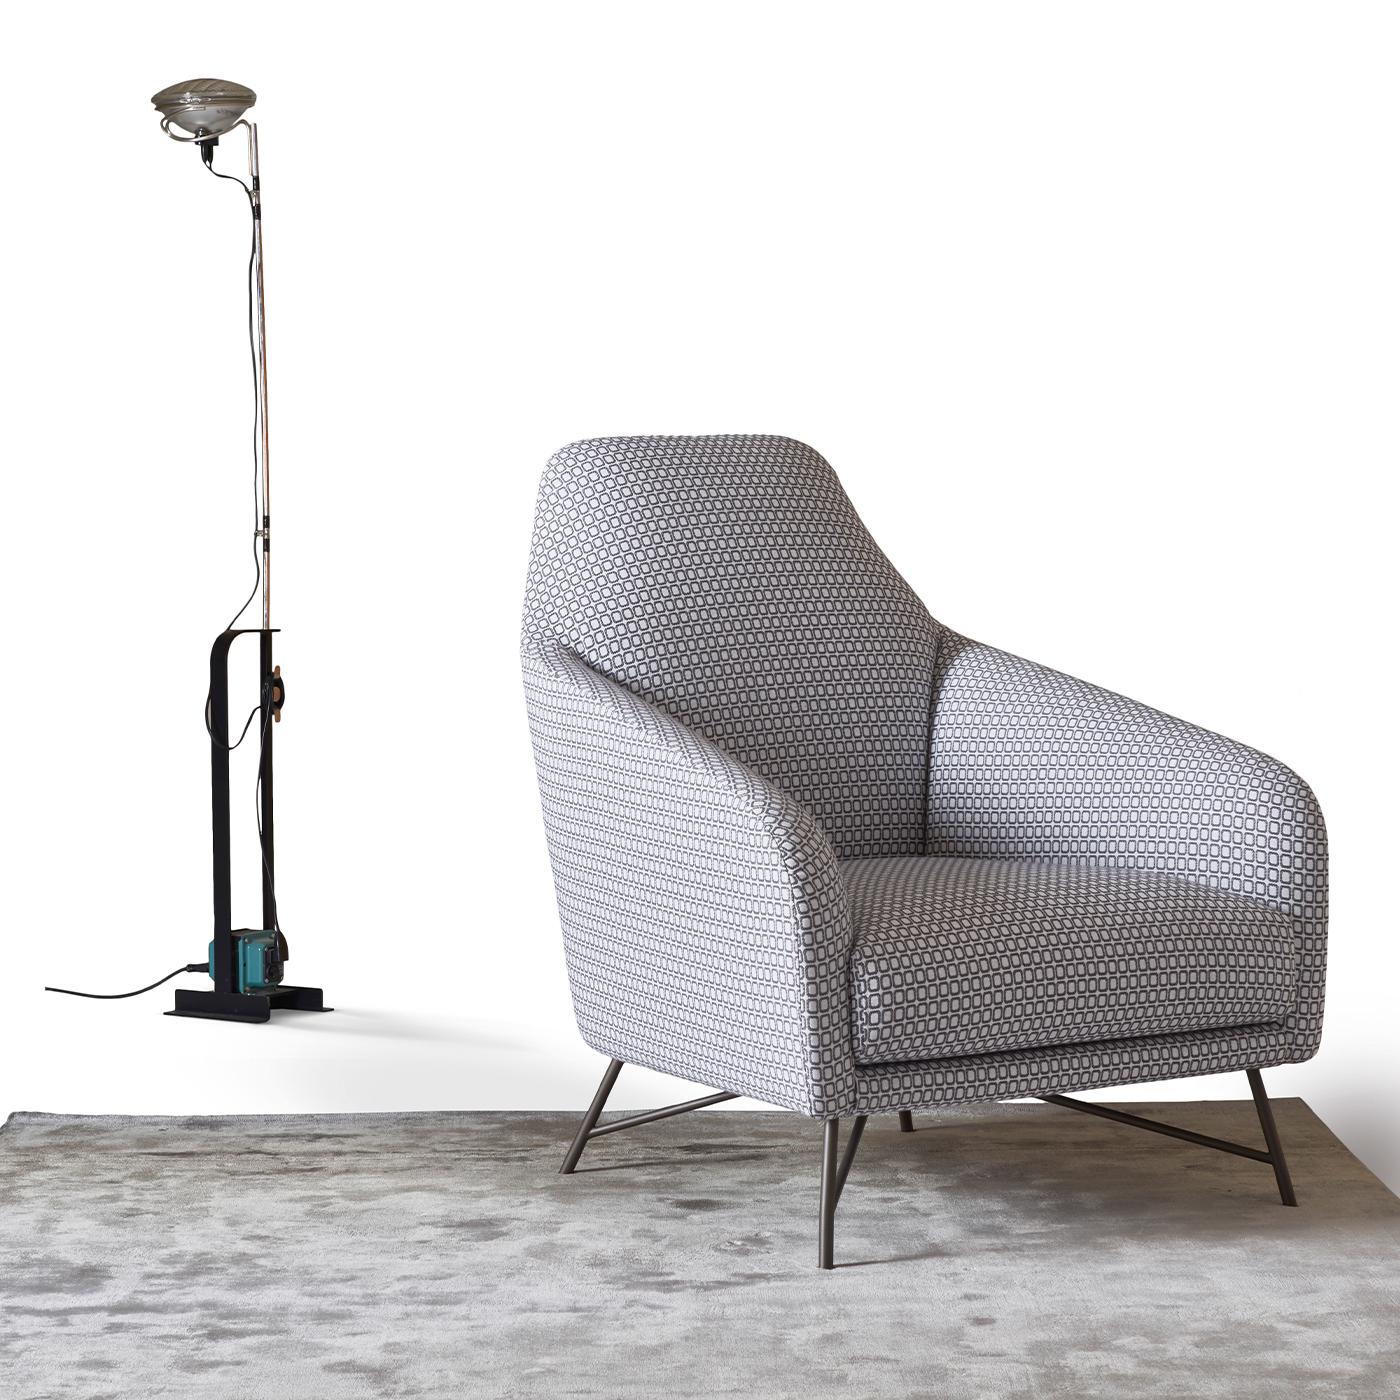 Inspired by the extravagant shapes of the 1950s, this singular armchair by Angeletti Ruzza will make a sophisticated statement in any modern decor. Made of gunmetal-lacquered metal, the four slanted legs feature a thin, tubular profile juxtaposed to